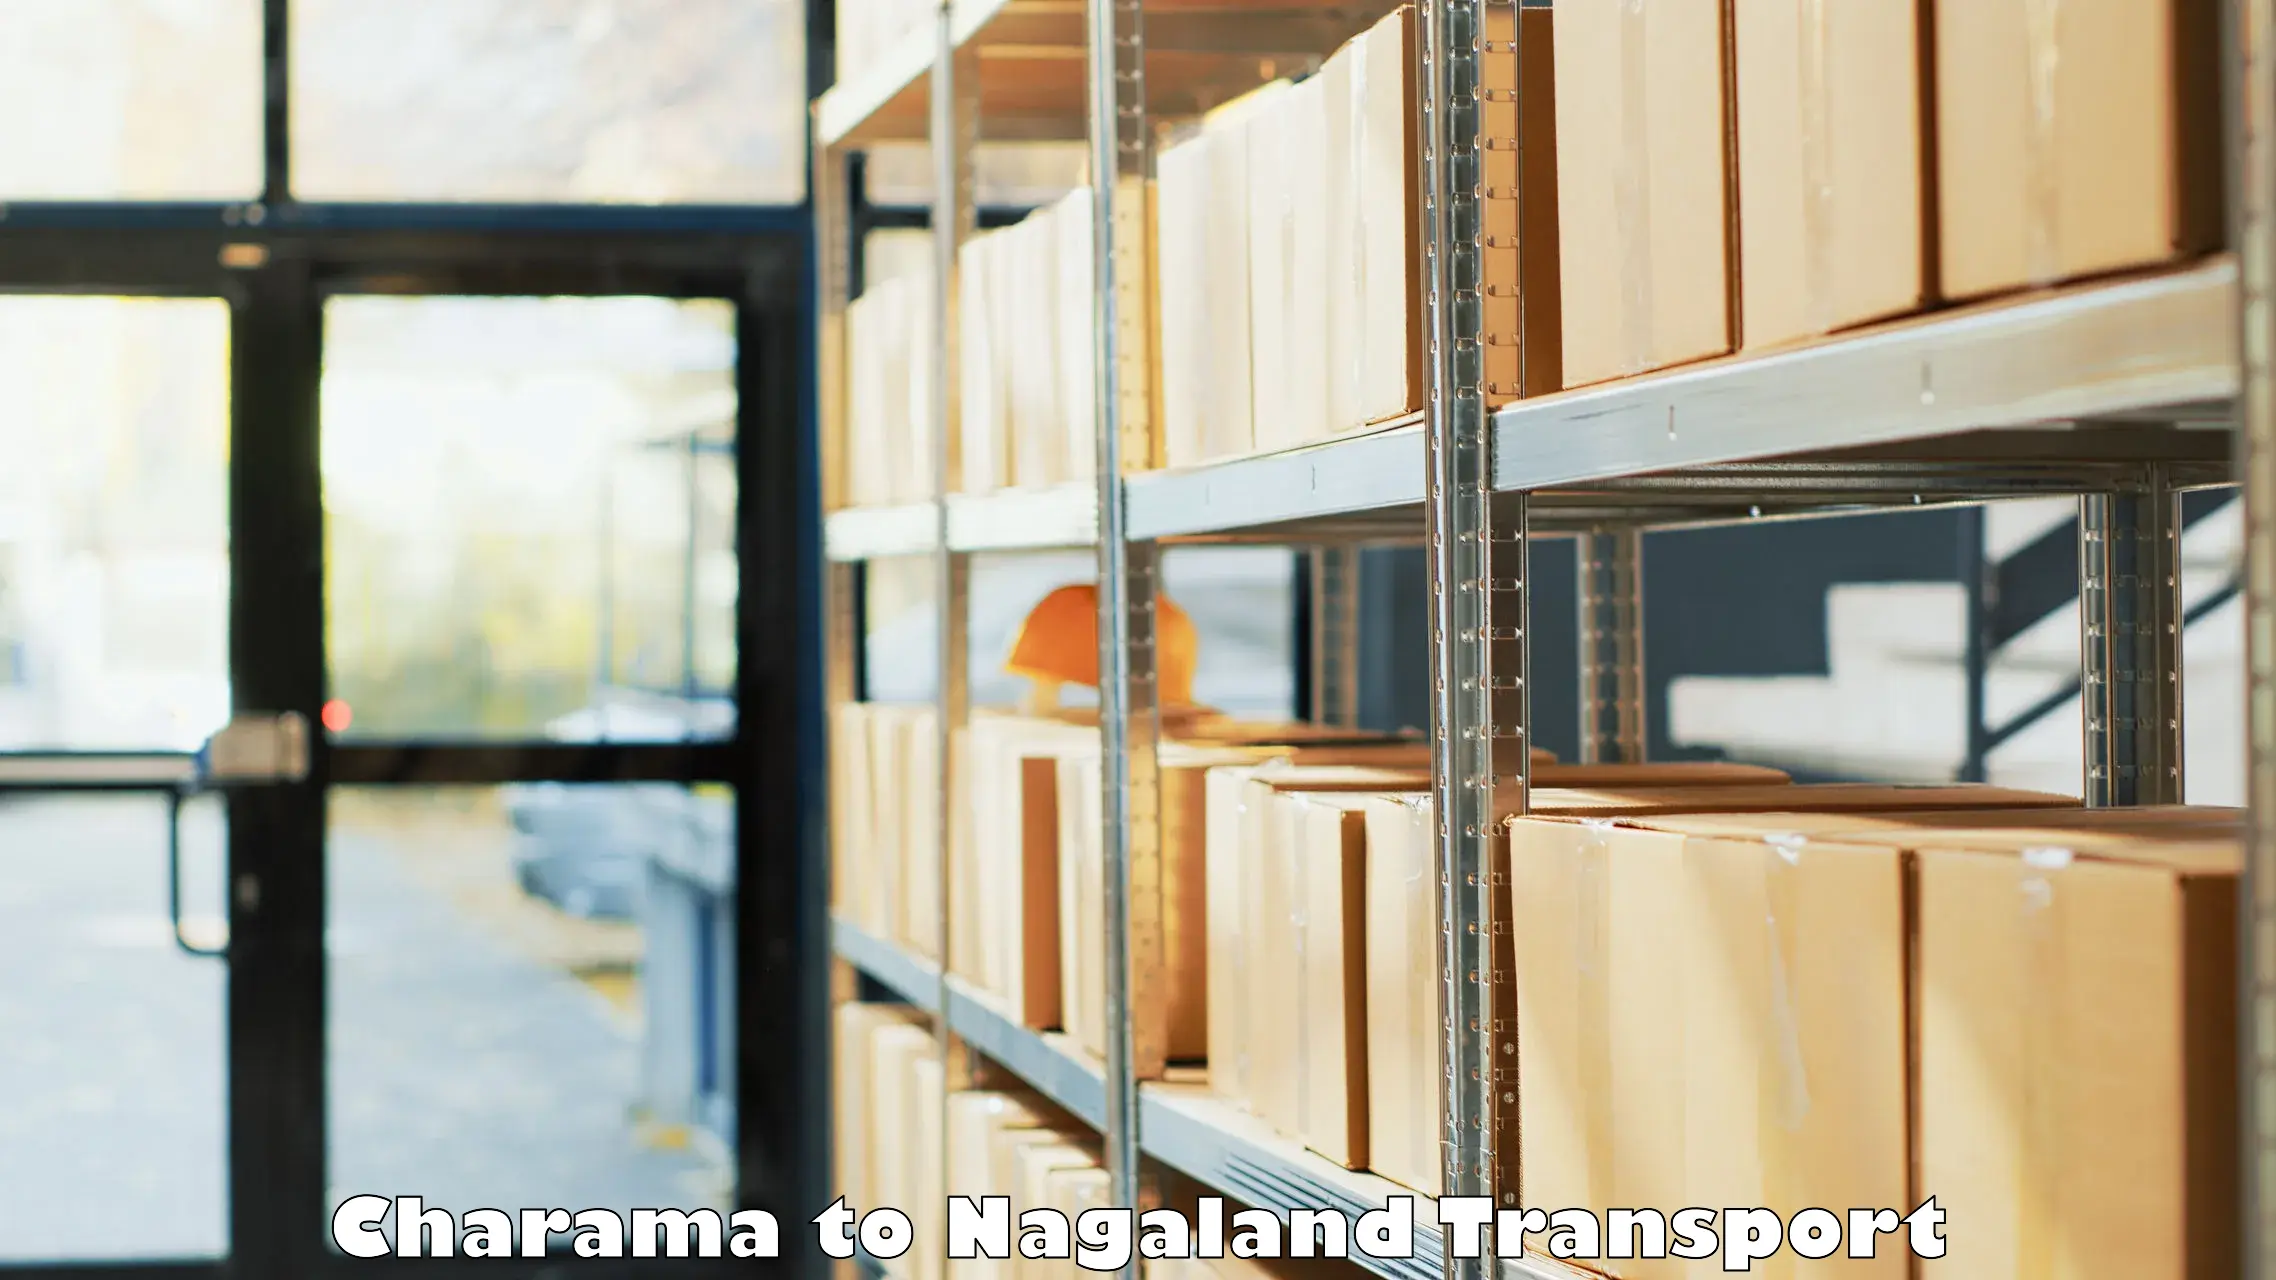 Goods delivery service Charama to Dimapur